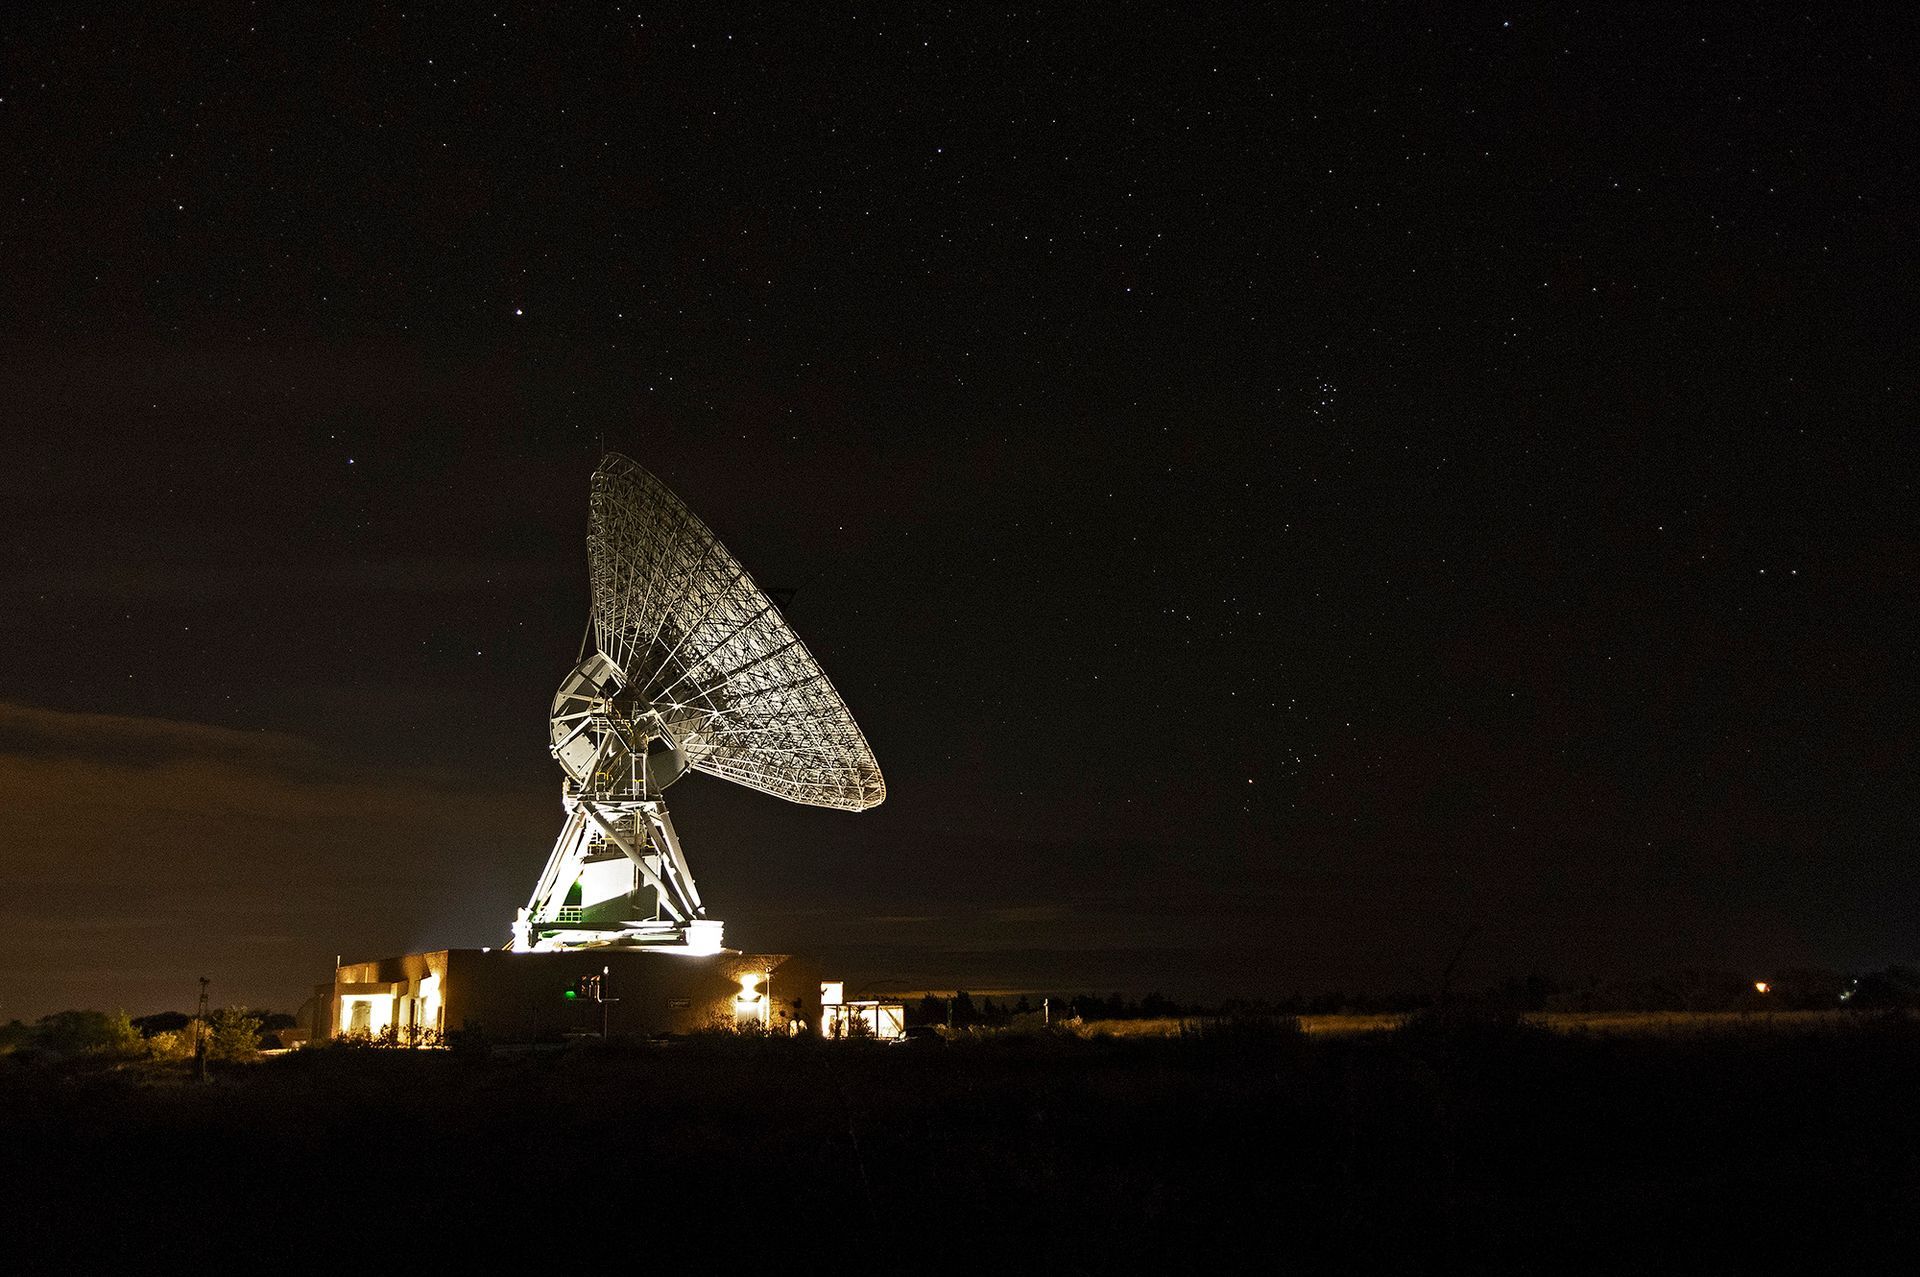 A picture of Goonhilly's Operational Control Centre (OCA) - the area in which the Deep Space Network Operations Team work. Large screens display information about lunar and deep space missions and computer stations are lit dramatically.